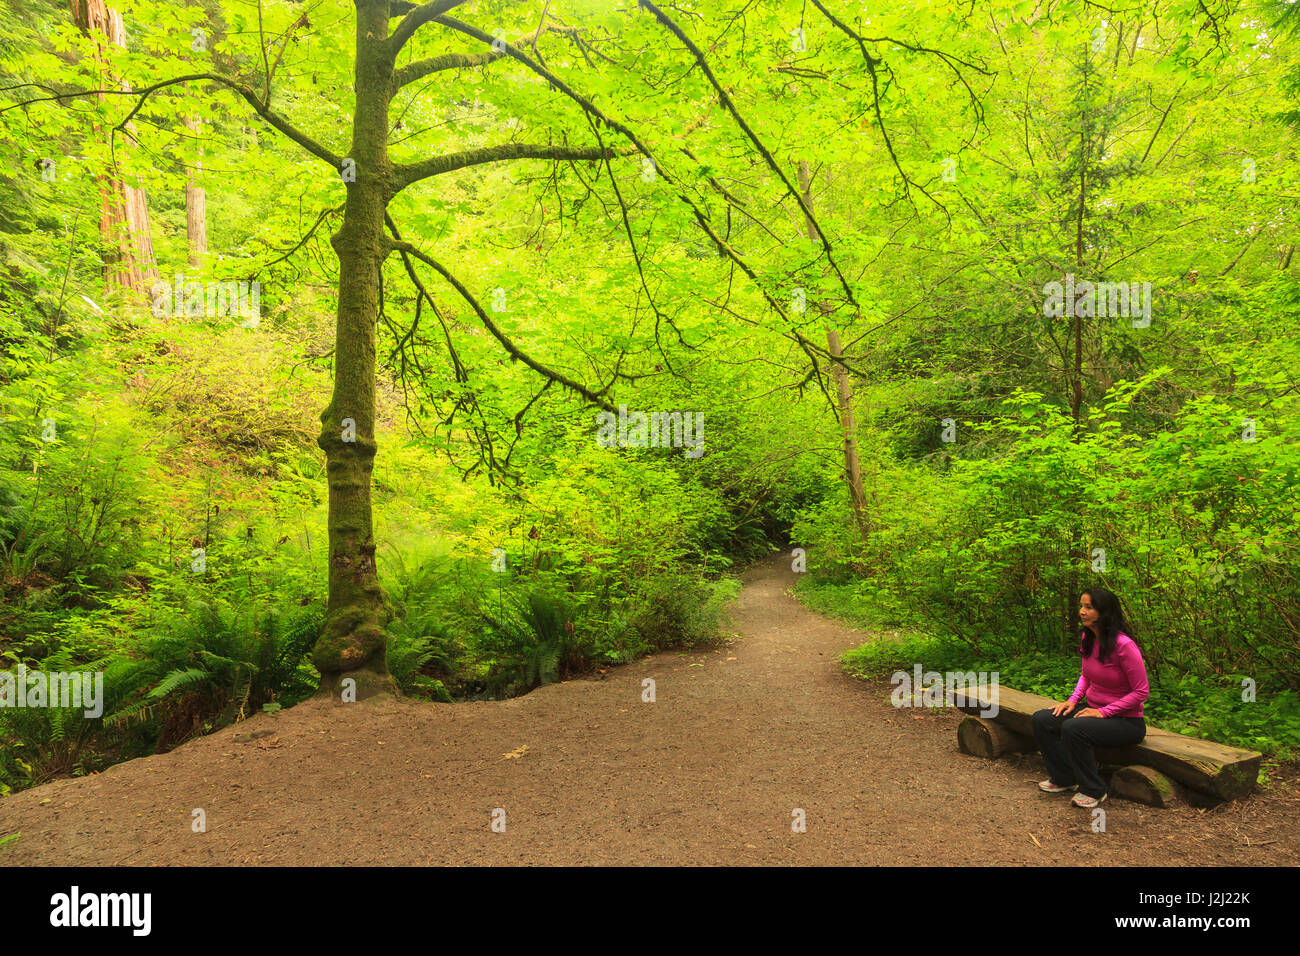 Woman, Schmitz Preserve Park, 53 acre old growth forest in West Seattle, WA, USA (MR) Stock Photo